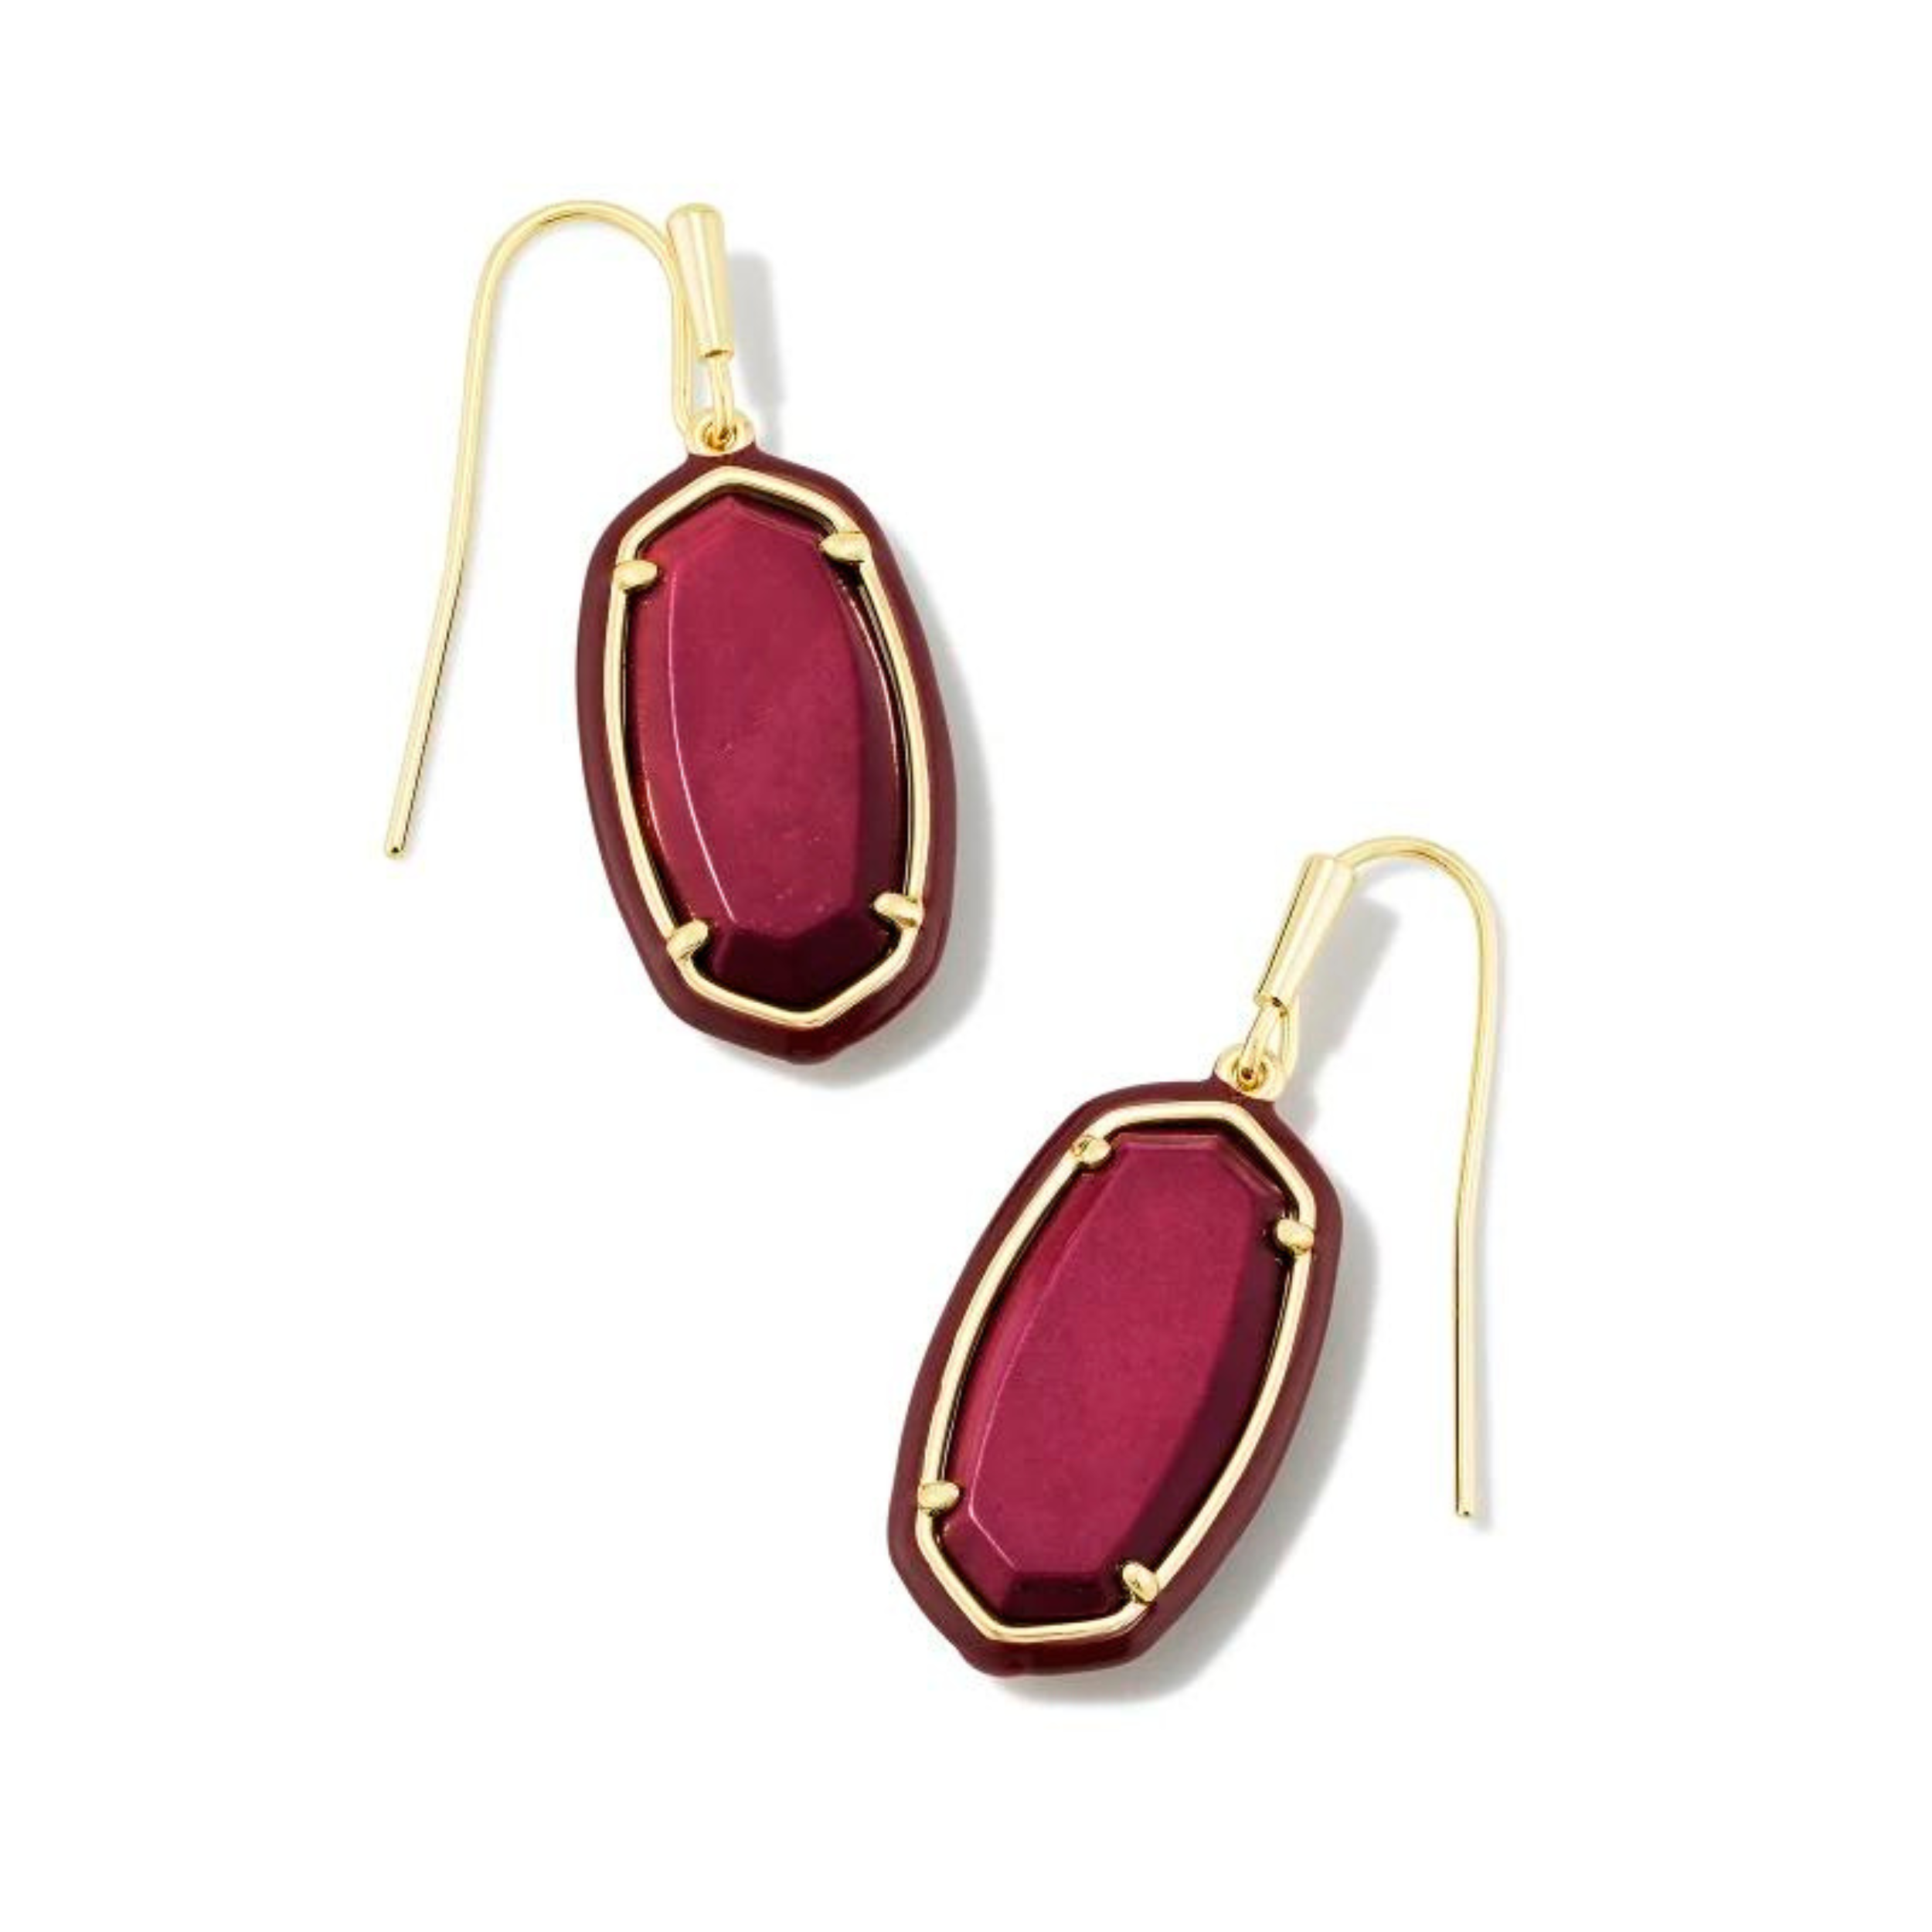 Maroon framed, oval shaped drop earrings with a center maroon stone and a gold fish hook earring. These earrings are pictured on a white background. 